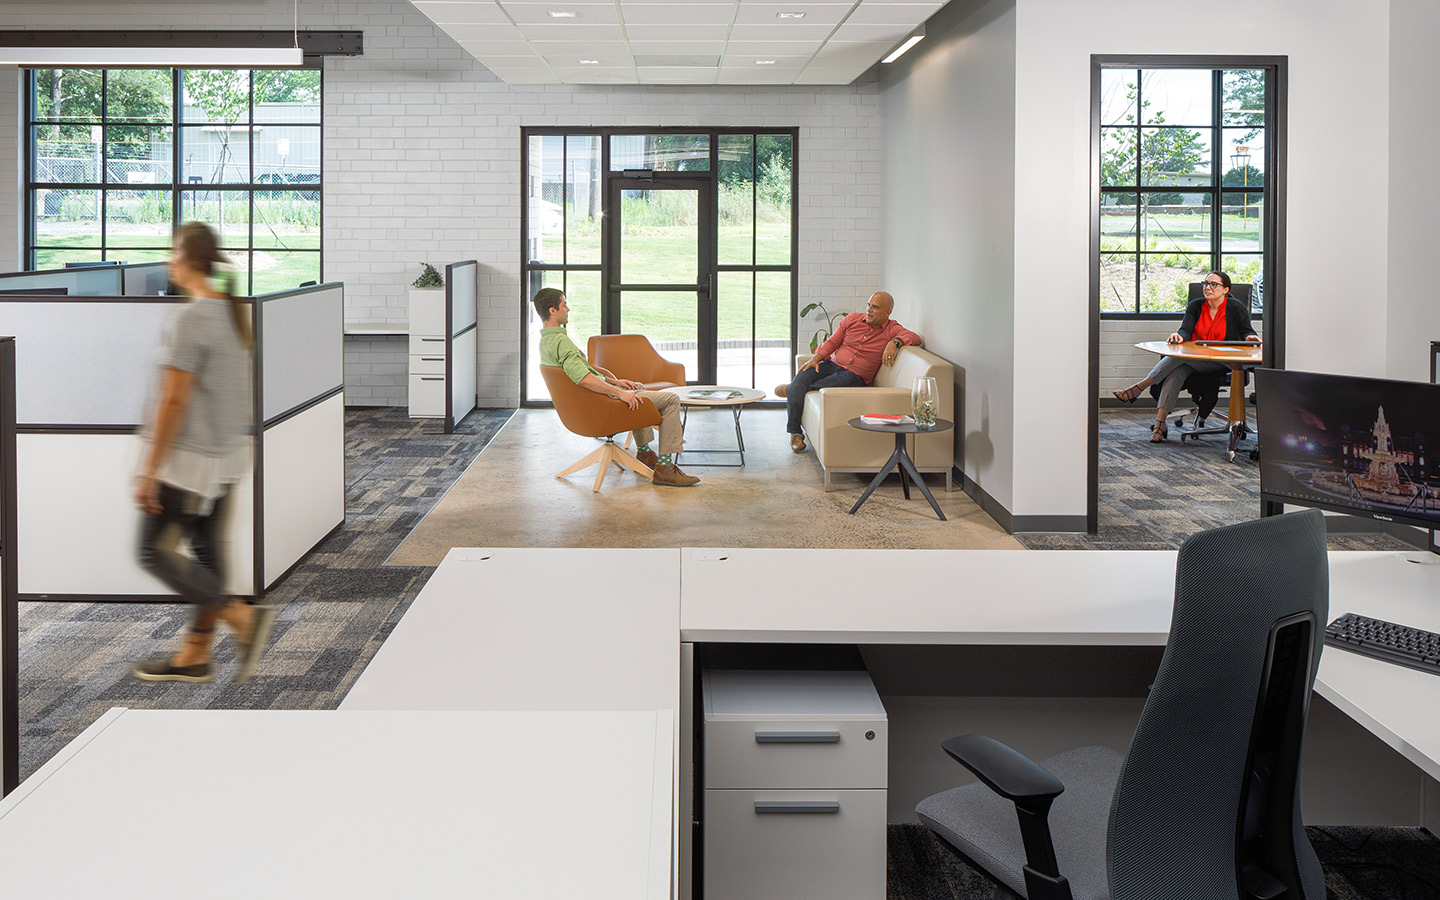 Cline Charlotte office showcasing social, desk, and office spaces